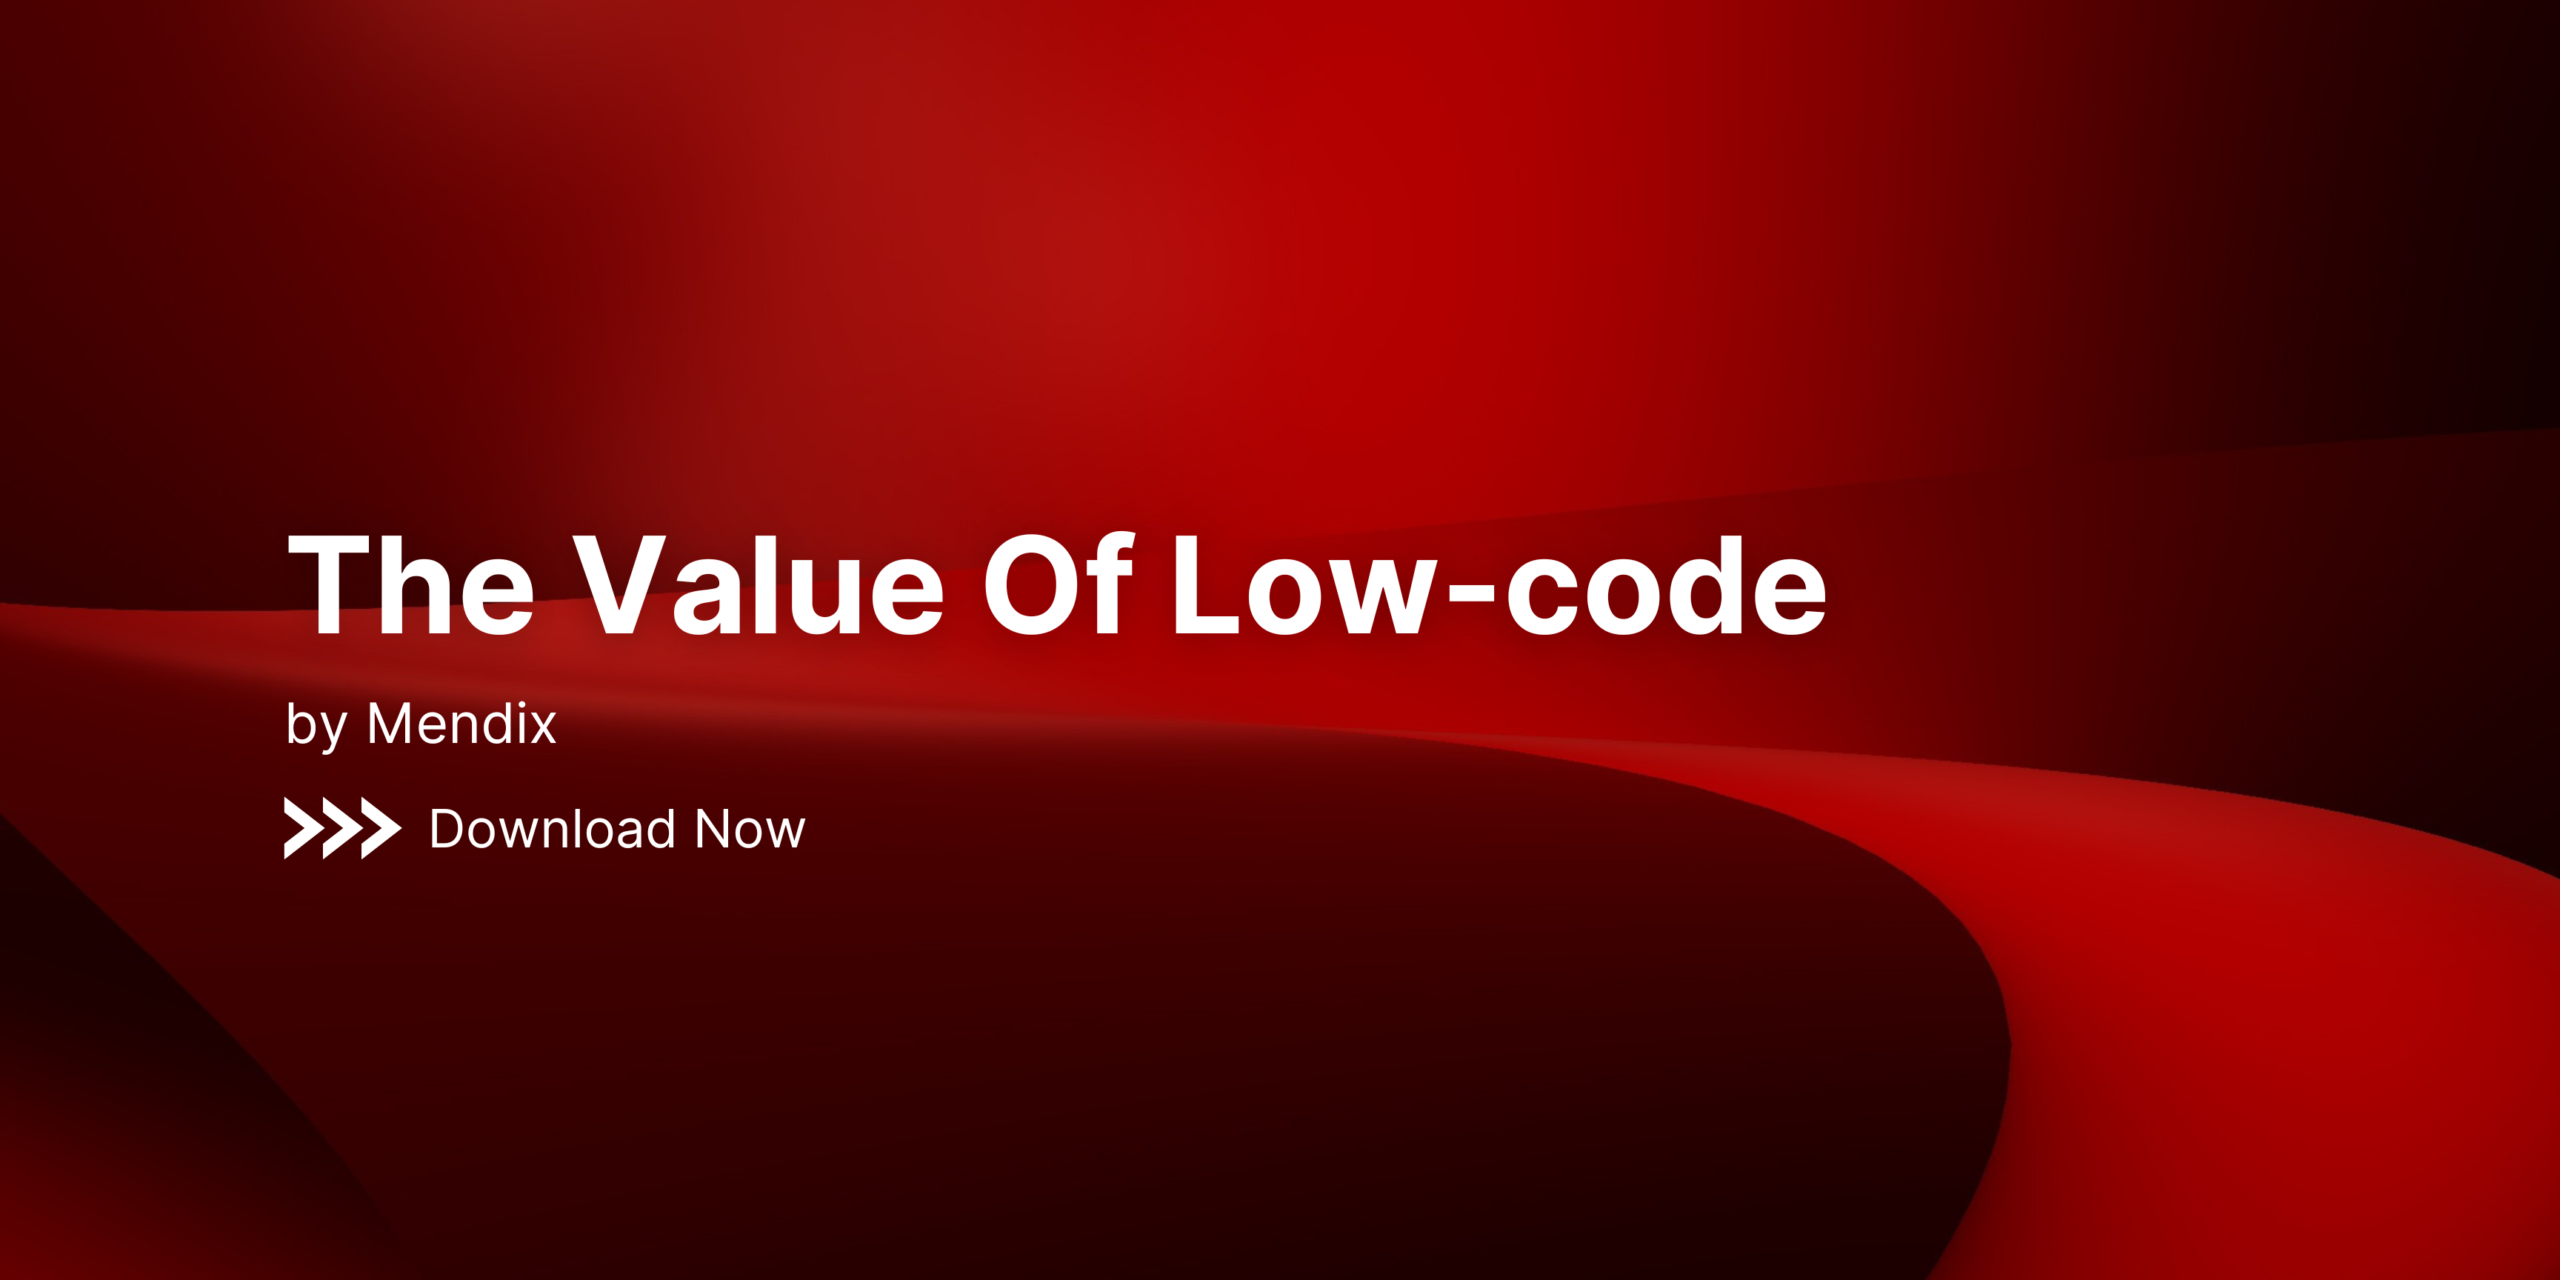 The Value Of Low-code